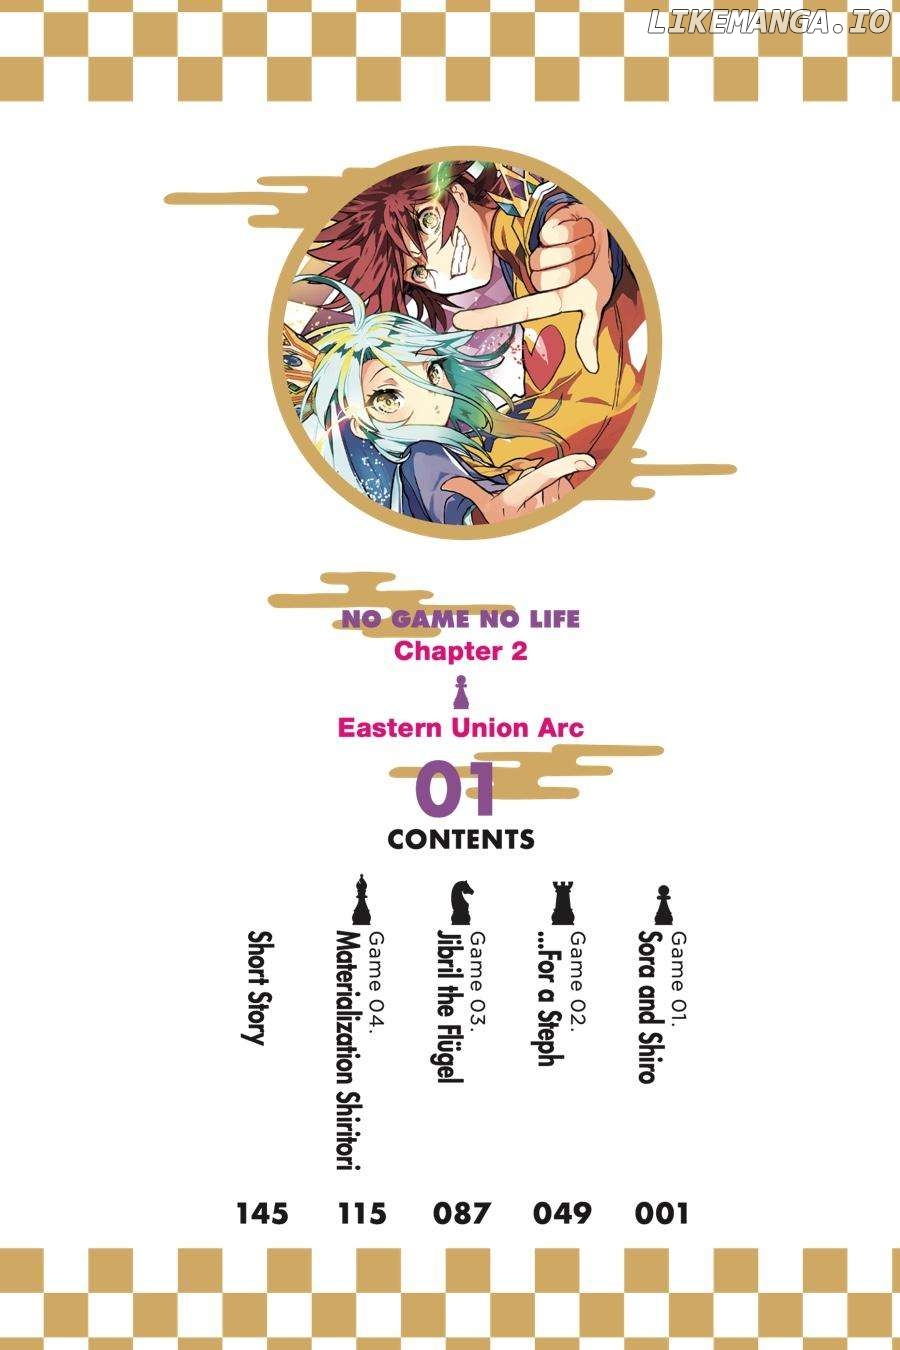 No Game No Life Chapter 2 - Eastern Union Arc Chapter 1 - page 4